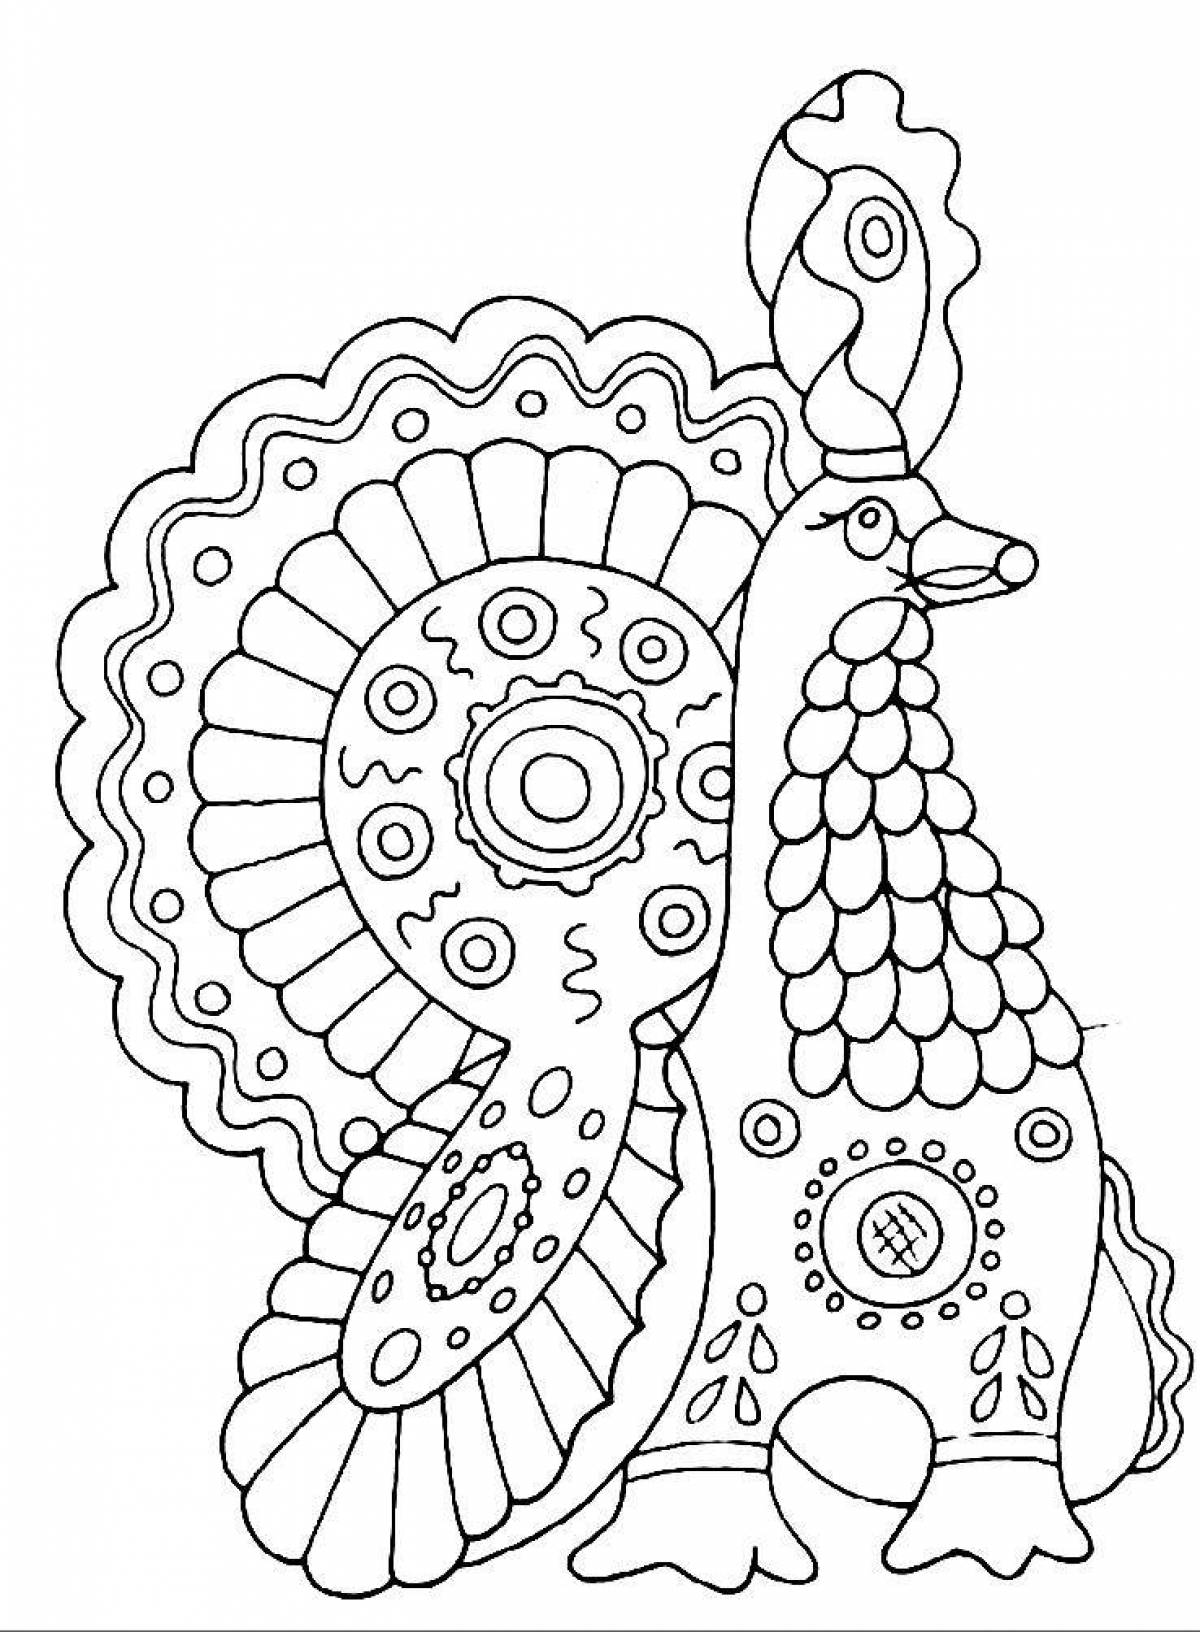 Coloring page wild folk toy